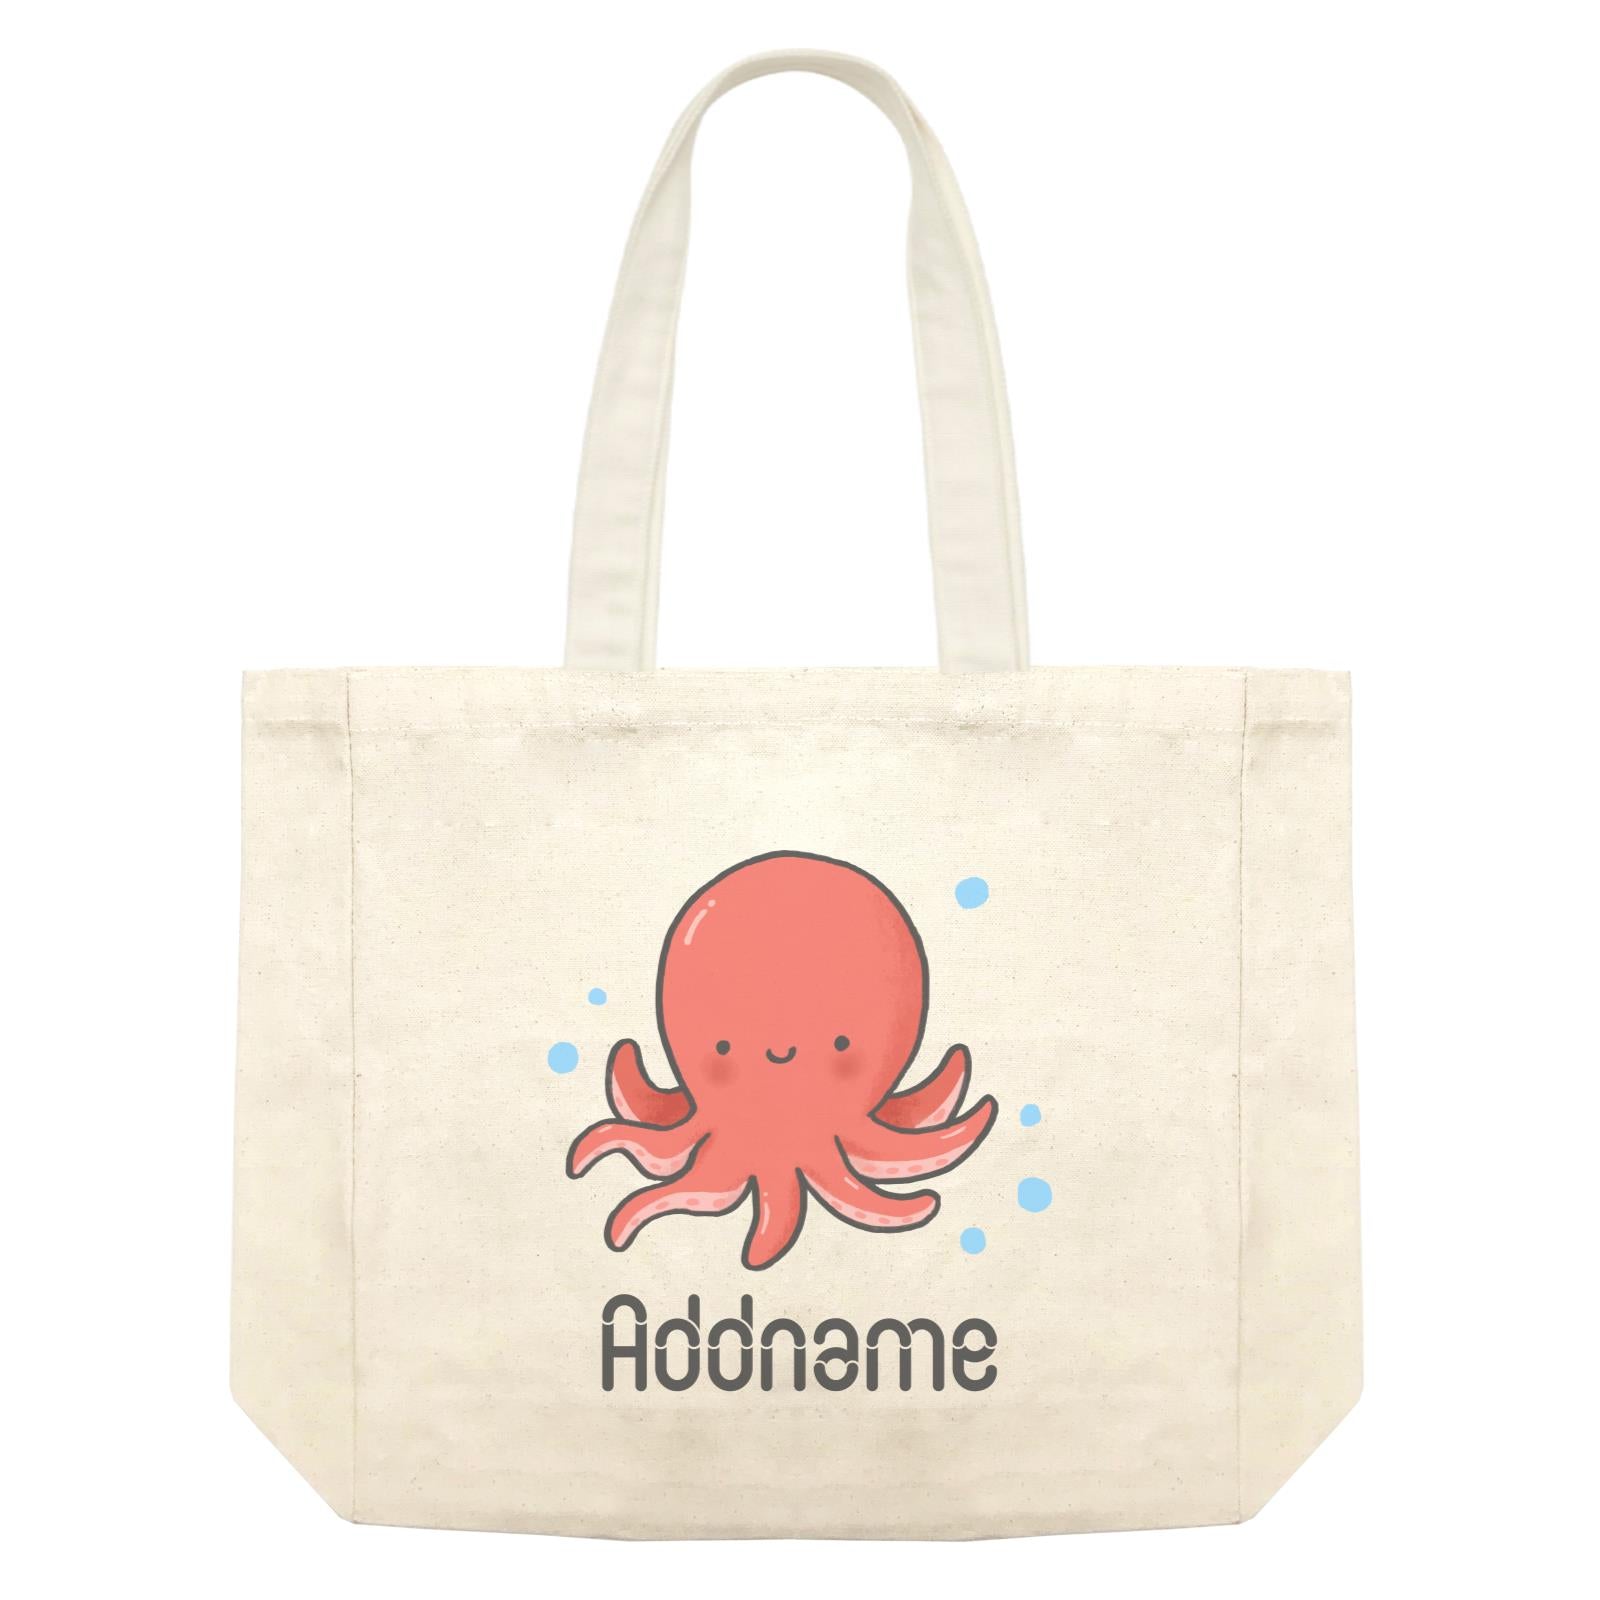 Cute Hand Drawn Style Octopus Addname Shopping Bag